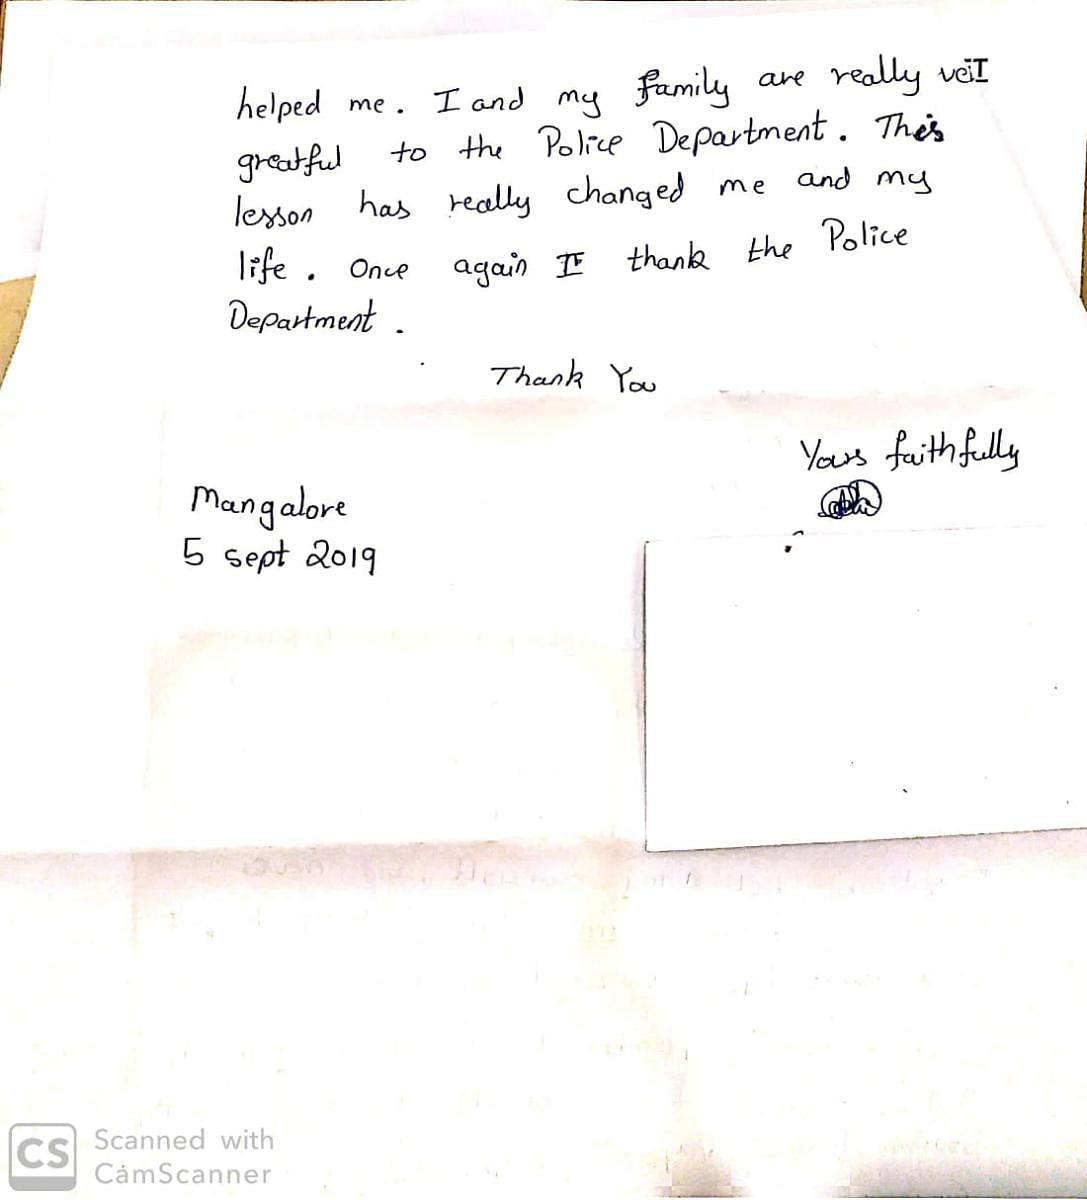 Police get ‘Thank you’ letter from reformed addict